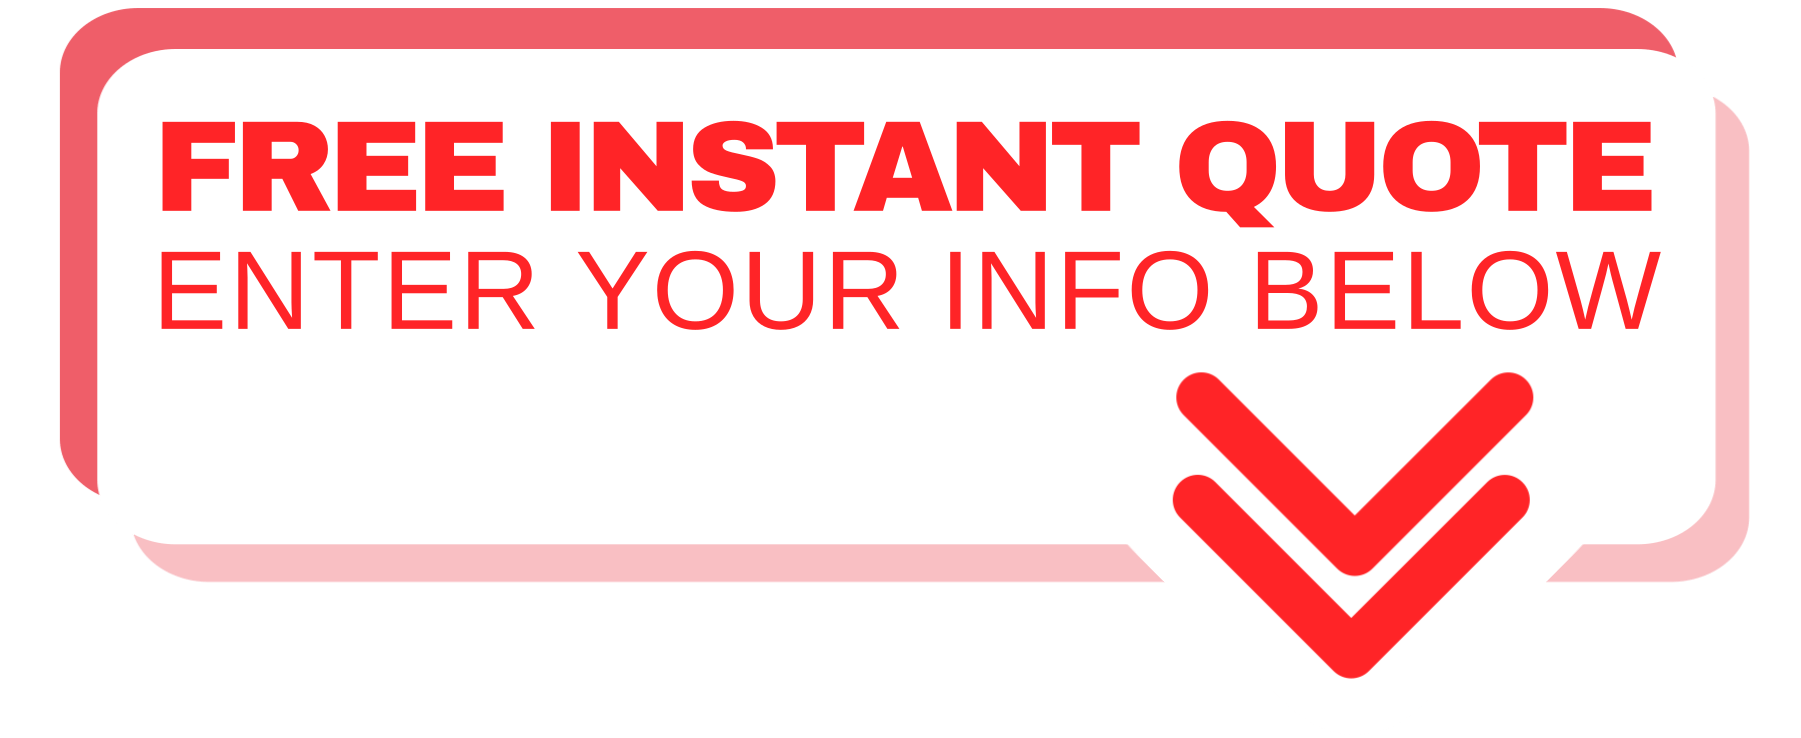 free instant quote banner over a contact form